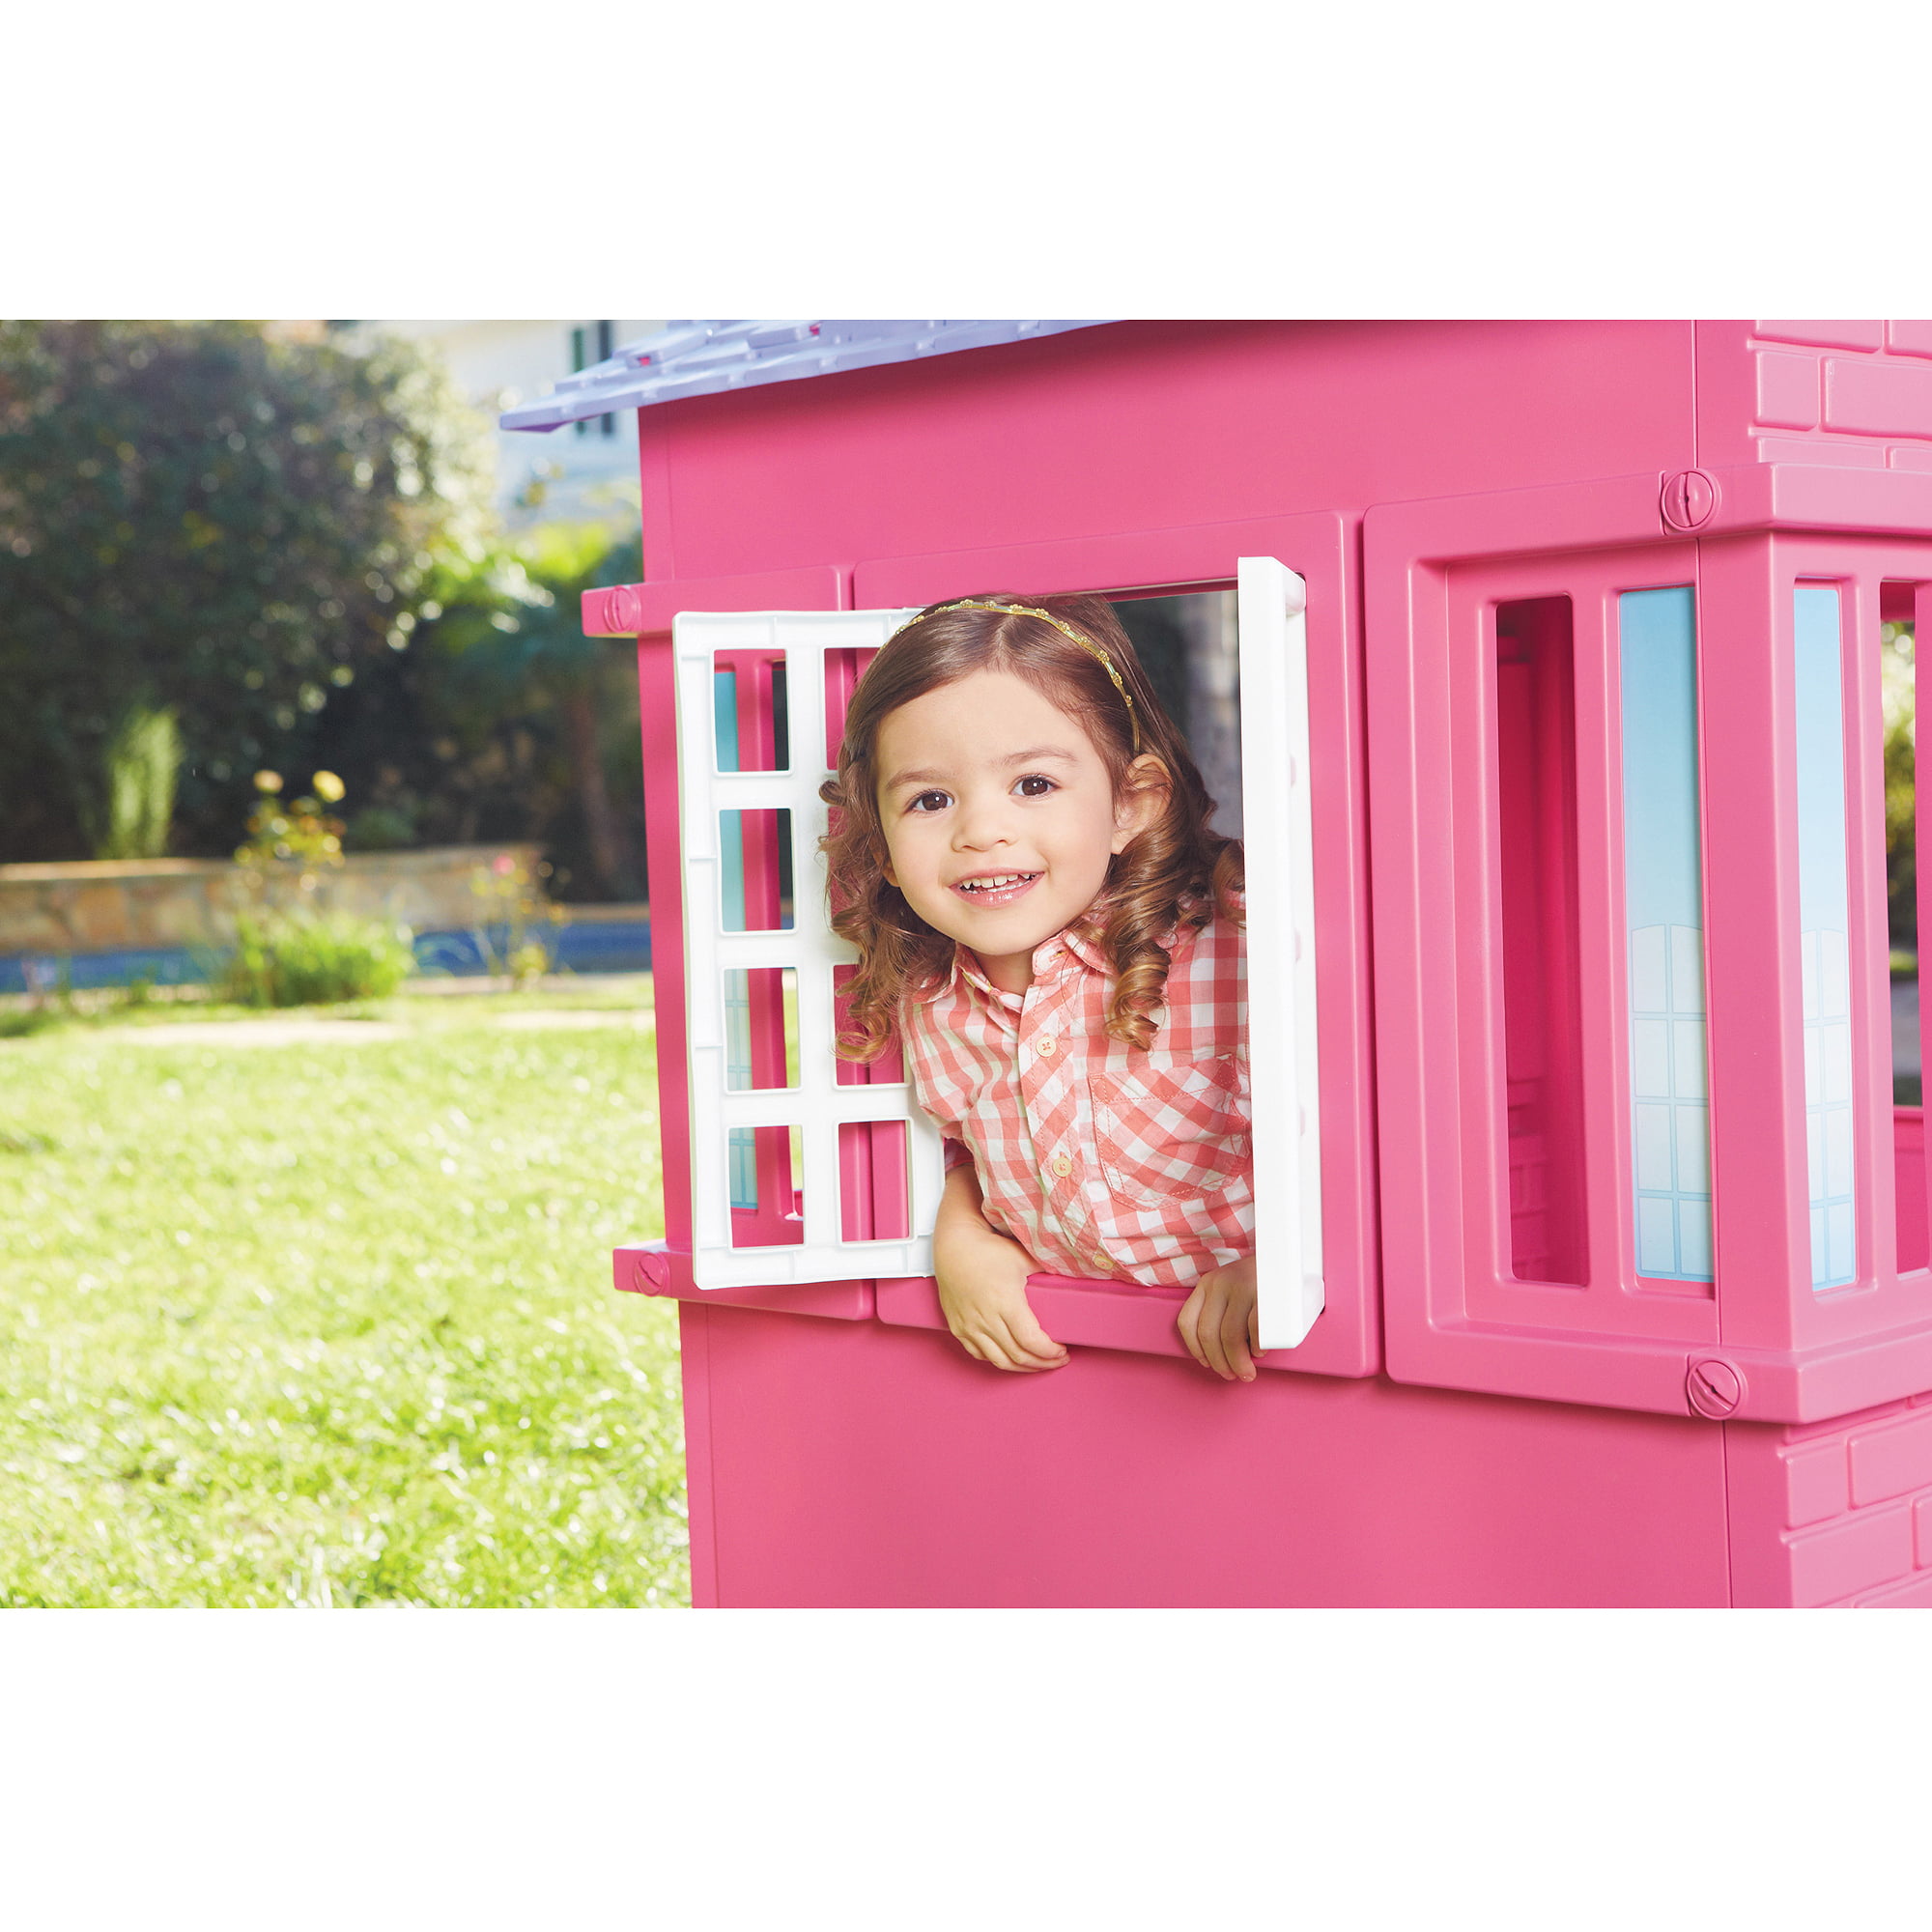 Princess Play Cottage Playhouse Home House Pink Pretend Toy Girls Kids Gift Kid